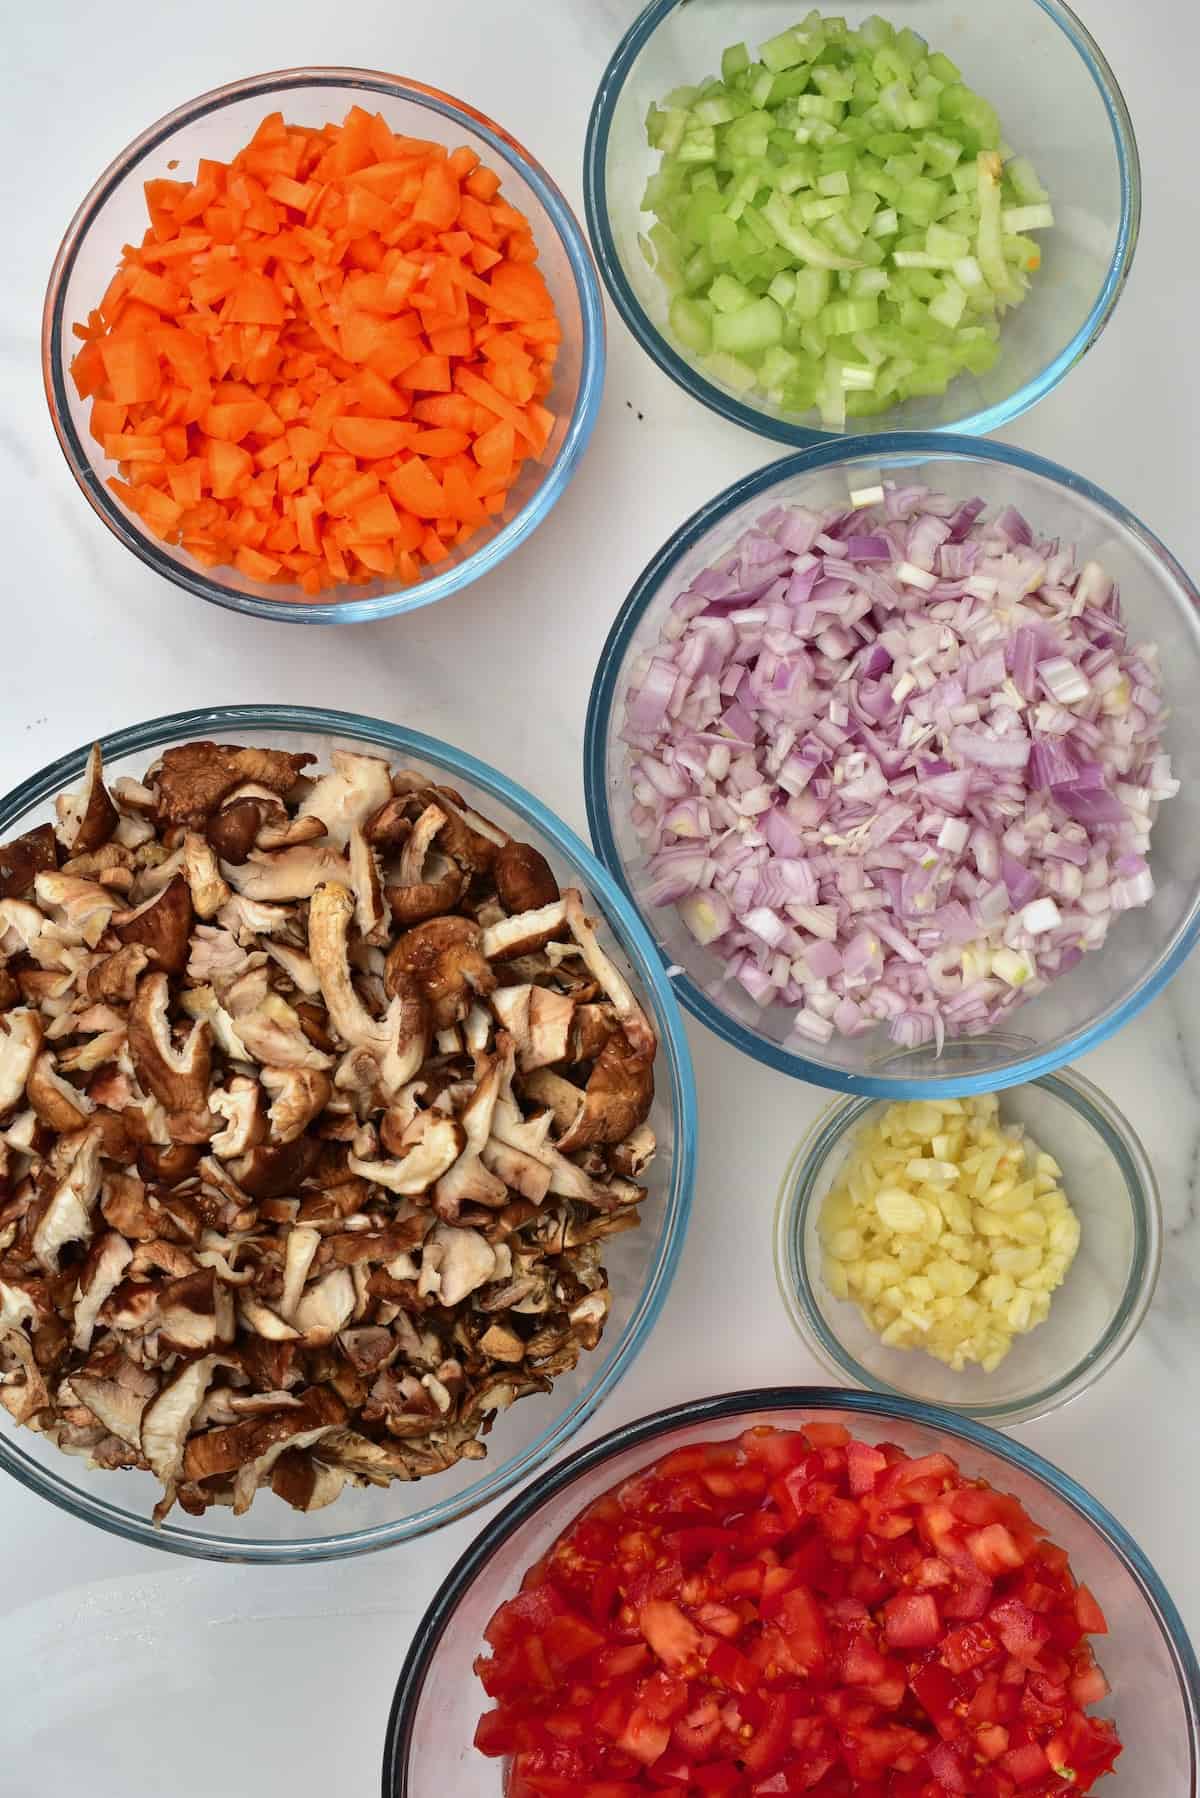 Chopped veggies in different bowls